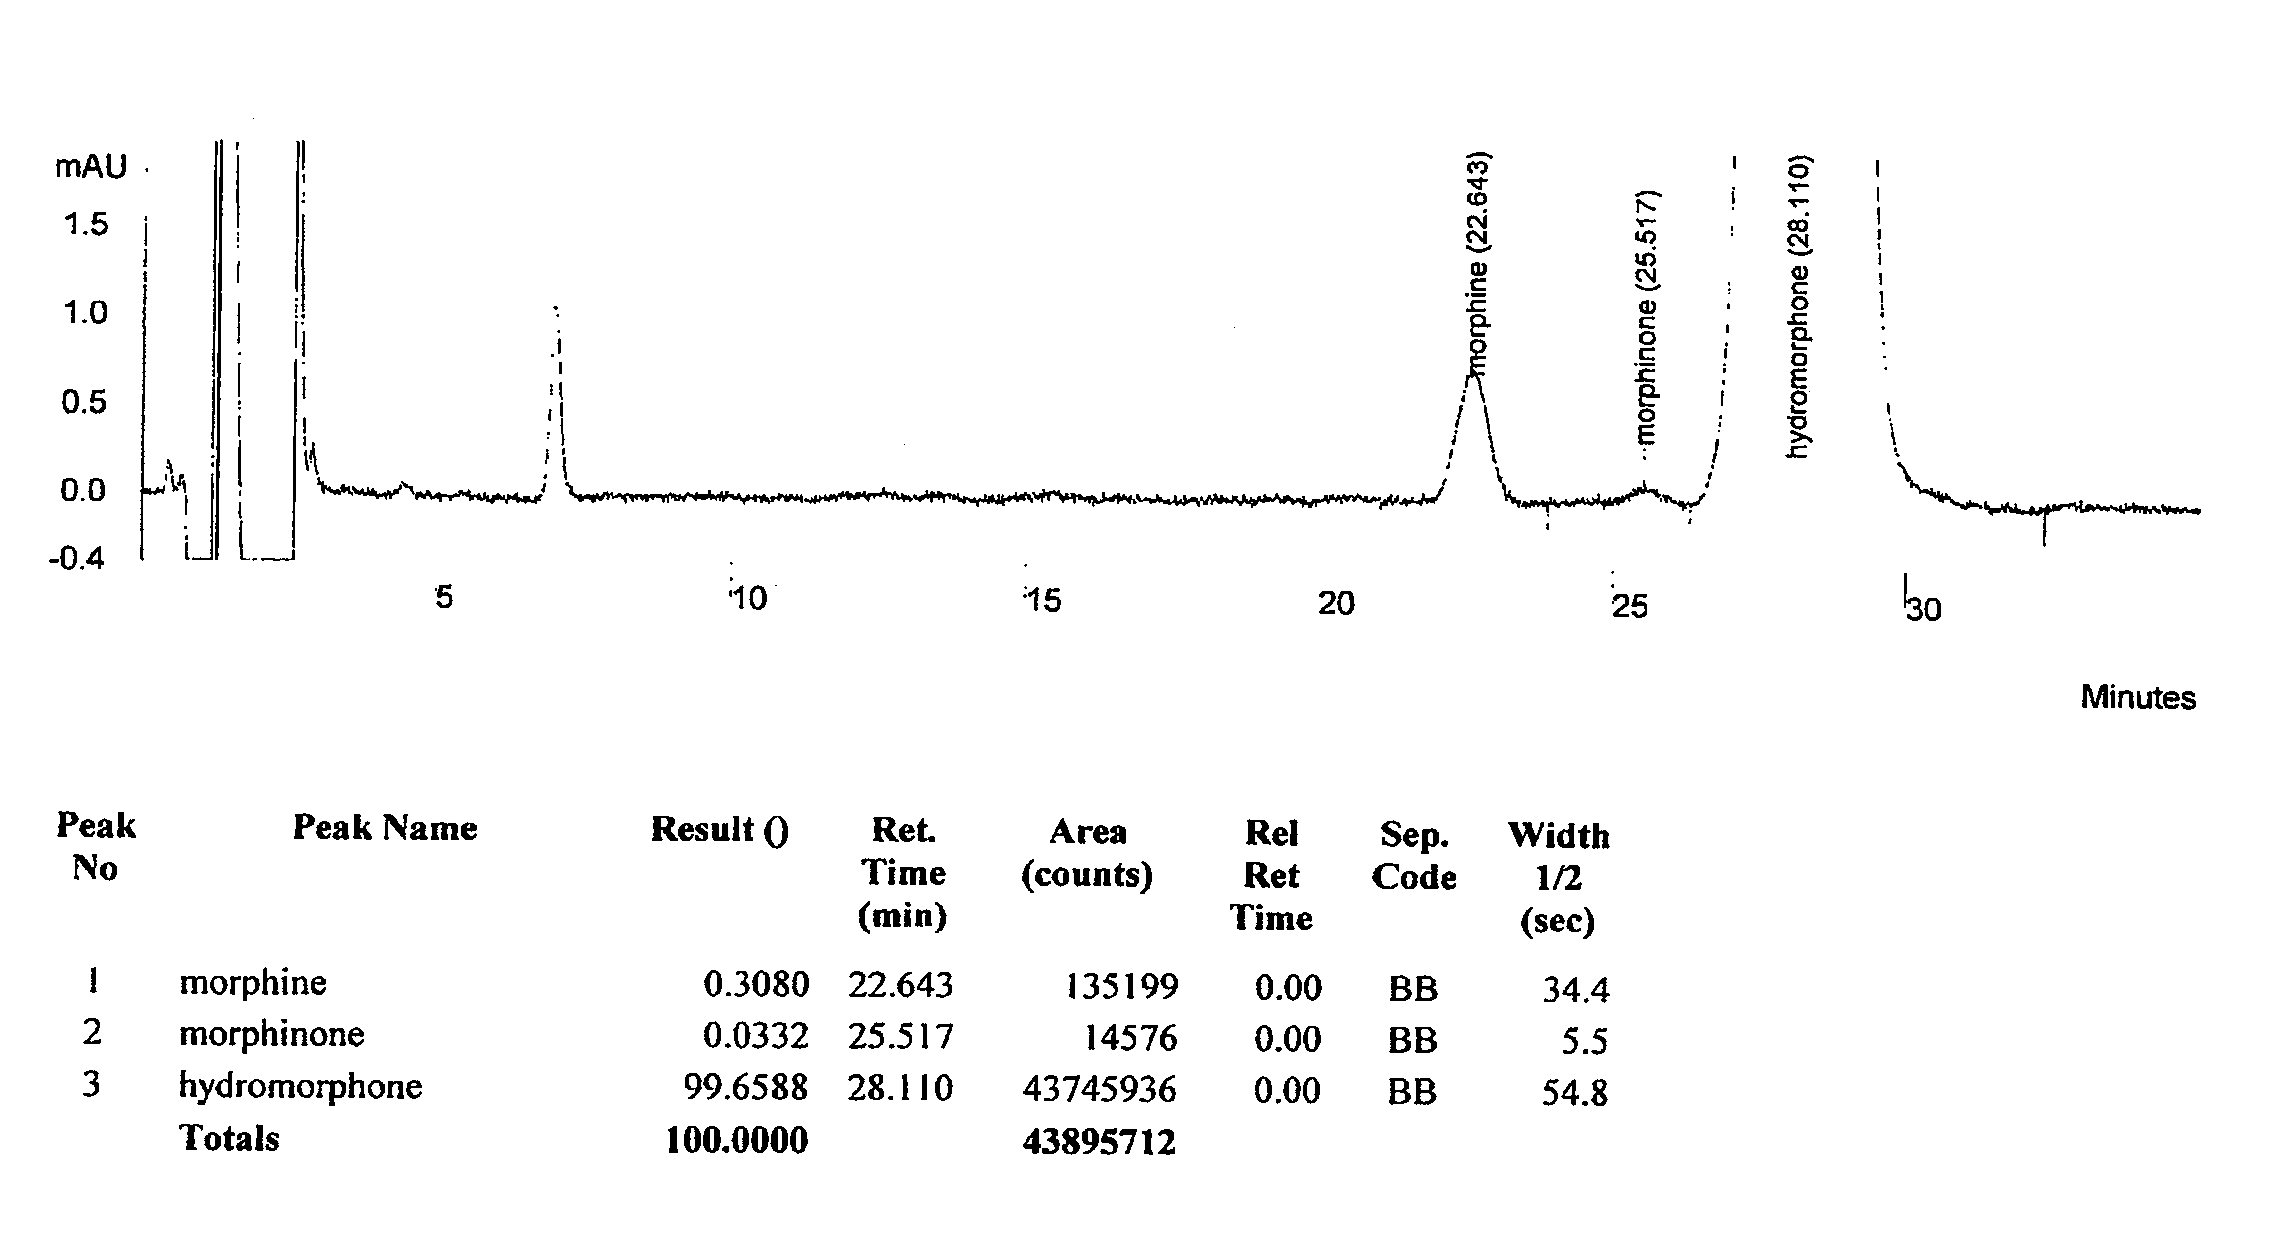 HPLC method for separation and detection of hydromorphone and related opioid pharmacophores